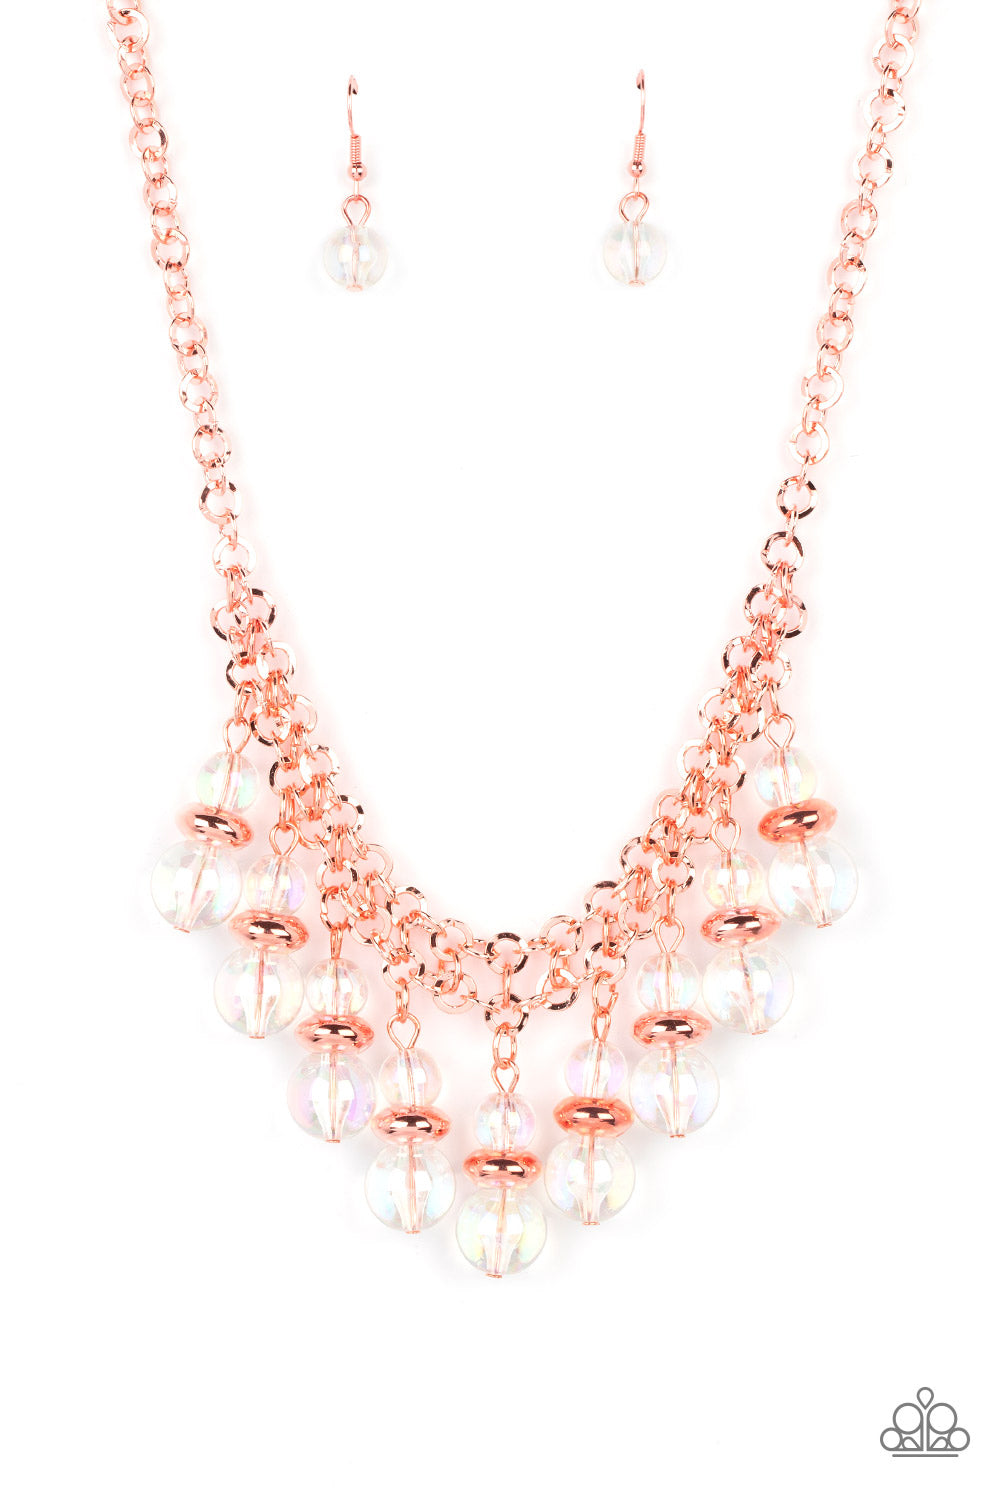 Deep Space Diva Copper Necklace - Paparazzi Accessories  Featuring a stellar iridescence, pairs of glassy beads are separated by shiny copper discs, trickling below the collar in an effervescent fringe. Features an adjustable clasp closure. Due to its prismatic palette, color may vary.  Sold as one individual necklace. Includes one pair of matching earrings.